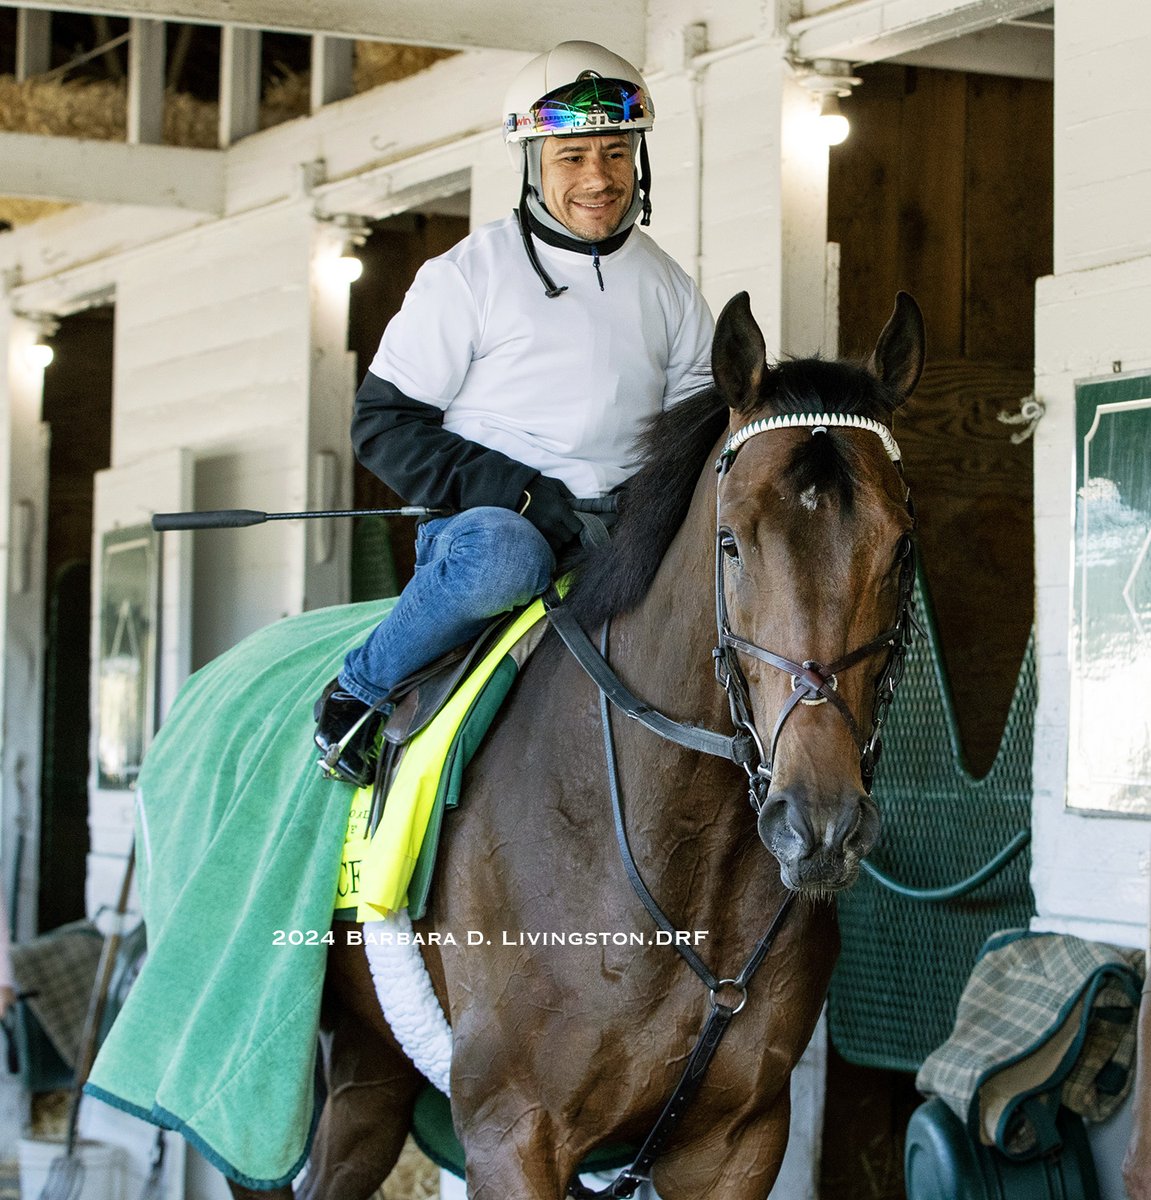 RESILIENCE and Junior Alvarado after they worked this AM at Churchill Downs Junior is not just an excellent rider but he very much respects and appreciates horses. He often pats and interacts with them; horses seem to respond positively to him. #KentuckyDerby